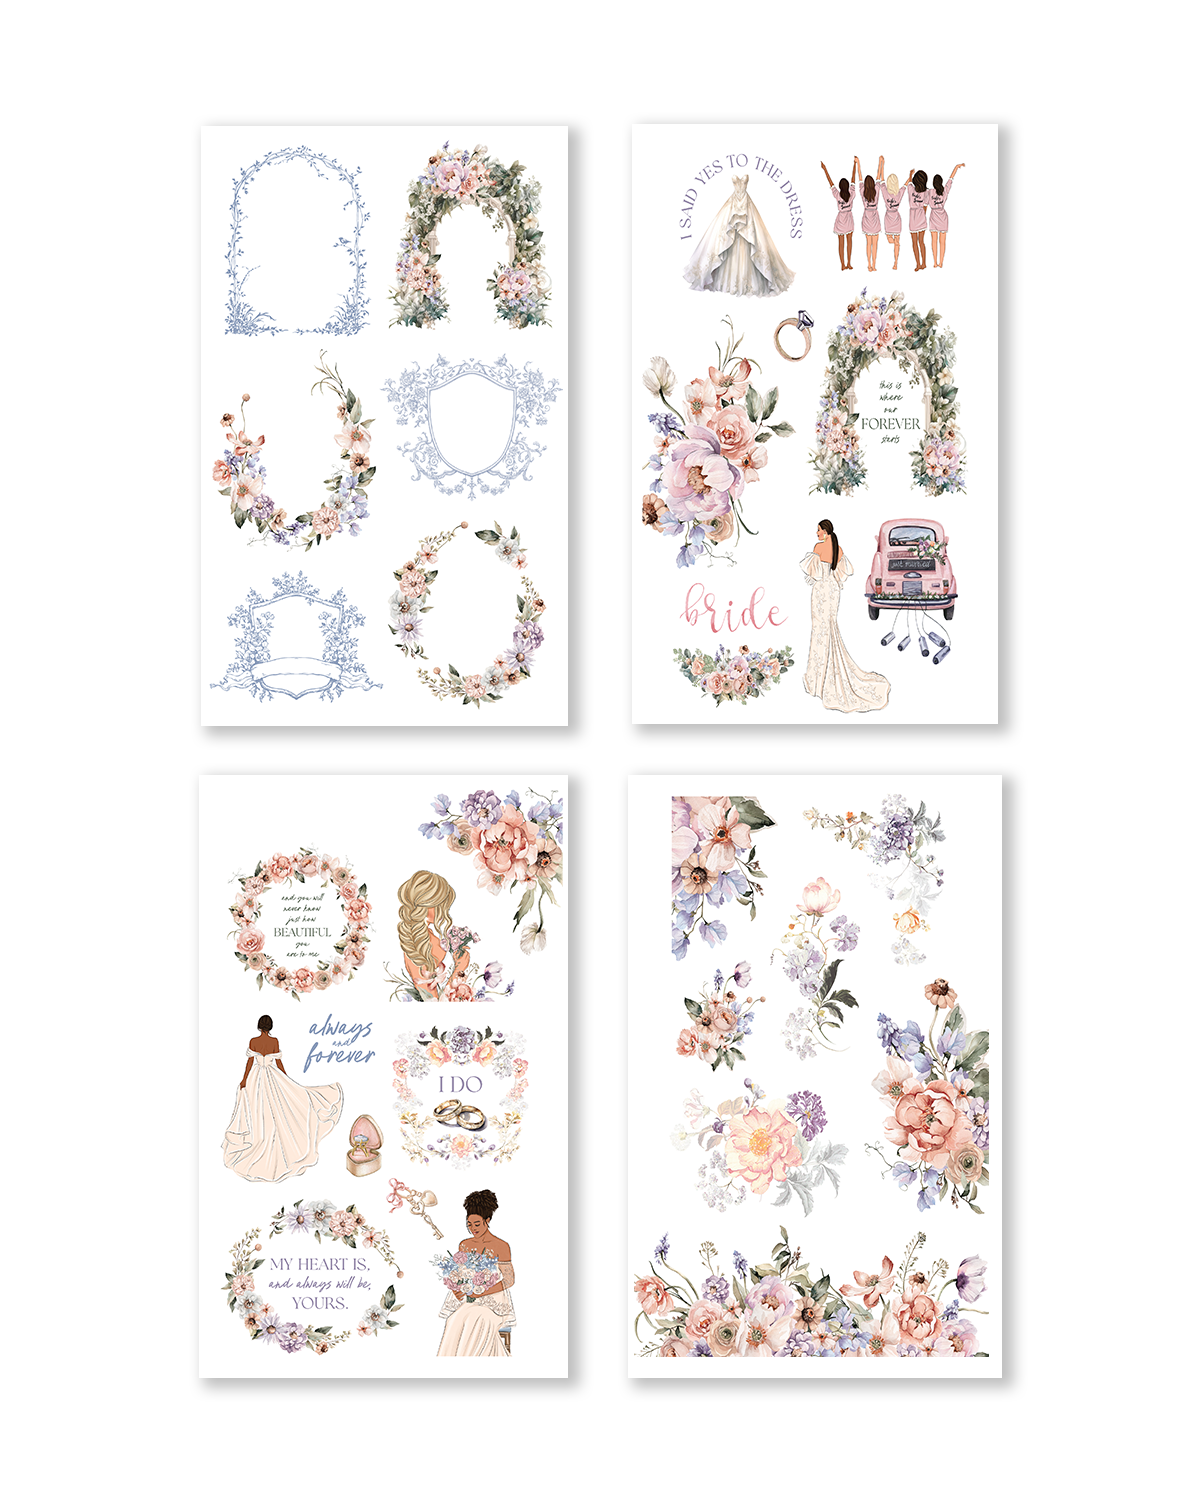 Shop Rongrong Happily Ever After Wedding Sticker Book